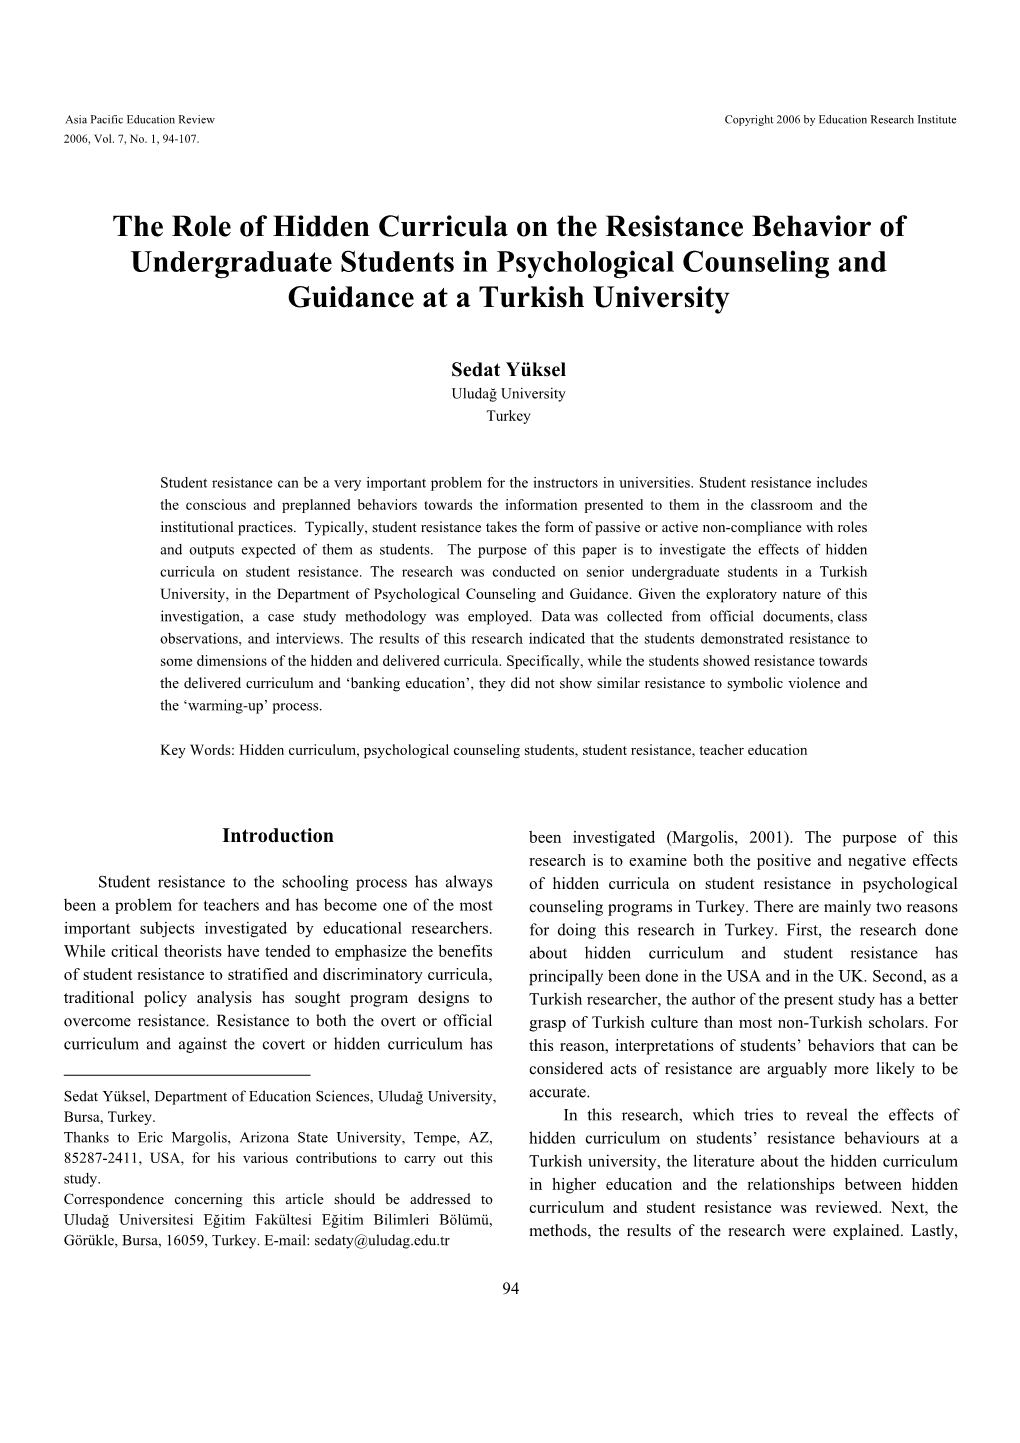 The Role of Hidden Curricula on the Resistance Behavior of Undergraduate Students in Psychological Counseling and Guidance at a Turkish University